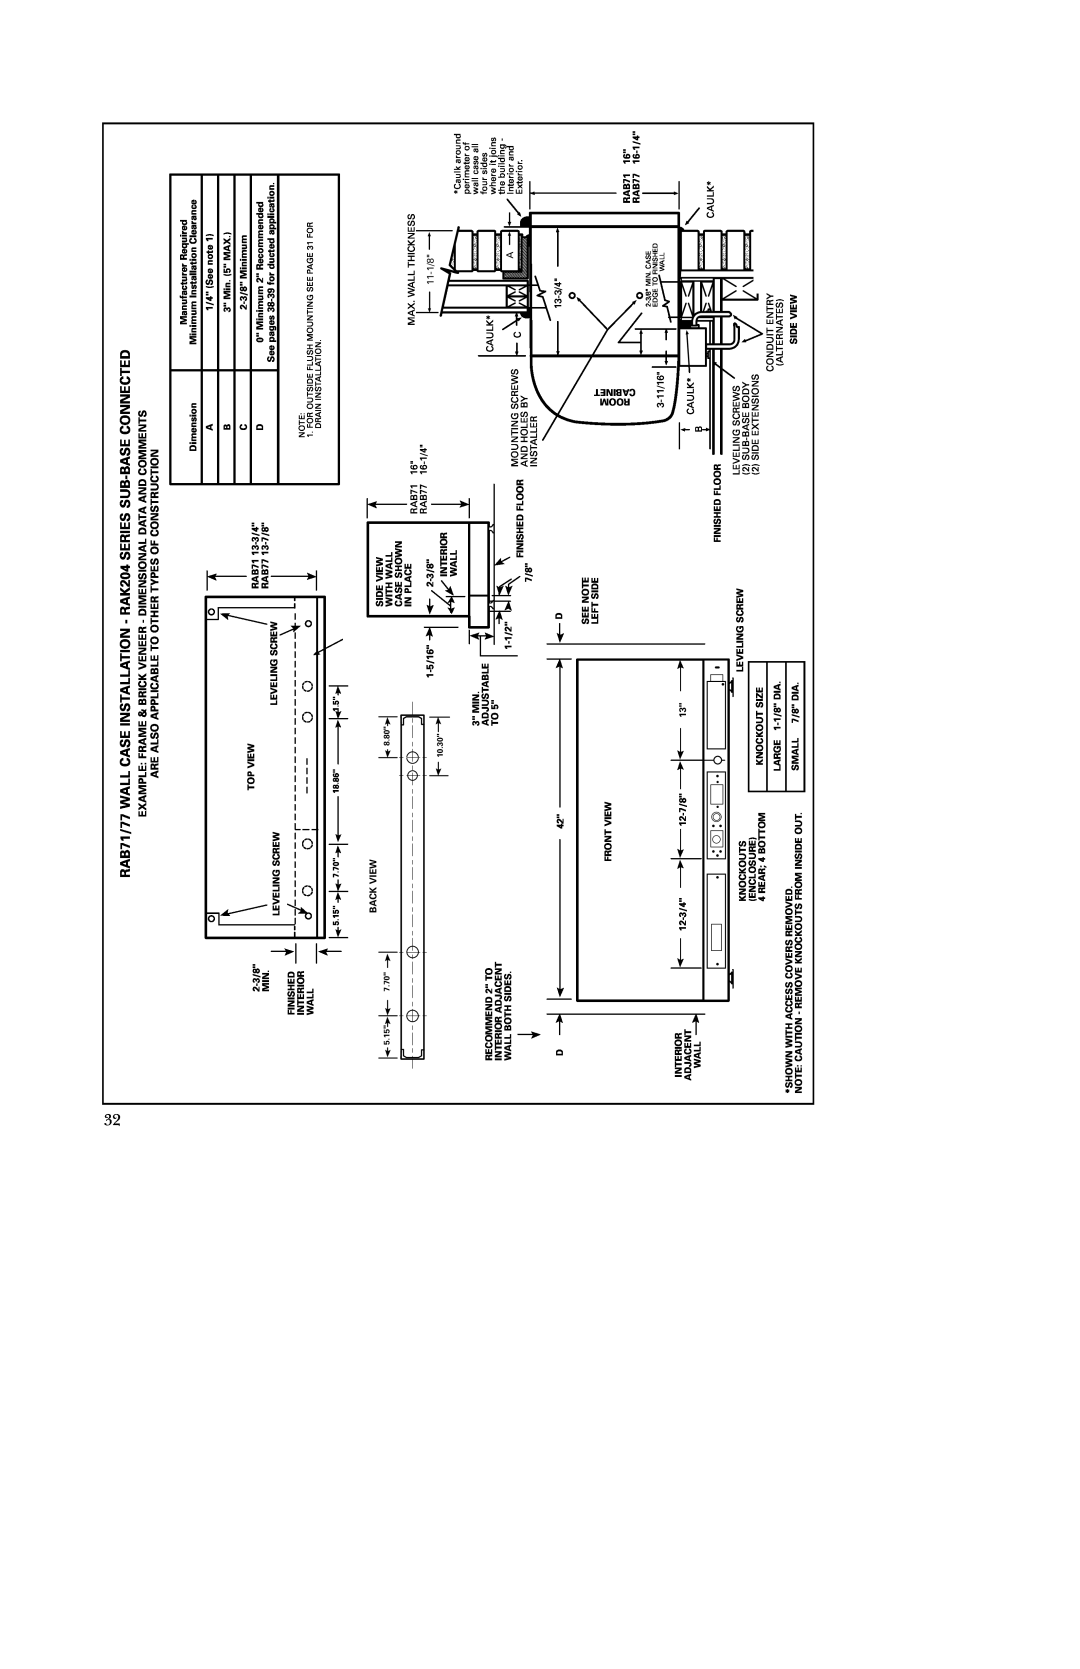 GE 5500 1/4 See note, 3 Min. 5 MAX, Top View, 2-3/8Minimum, RAB71 13-3/4, Minimum 2 Recommended, RAB77 13-7/8, Finished 